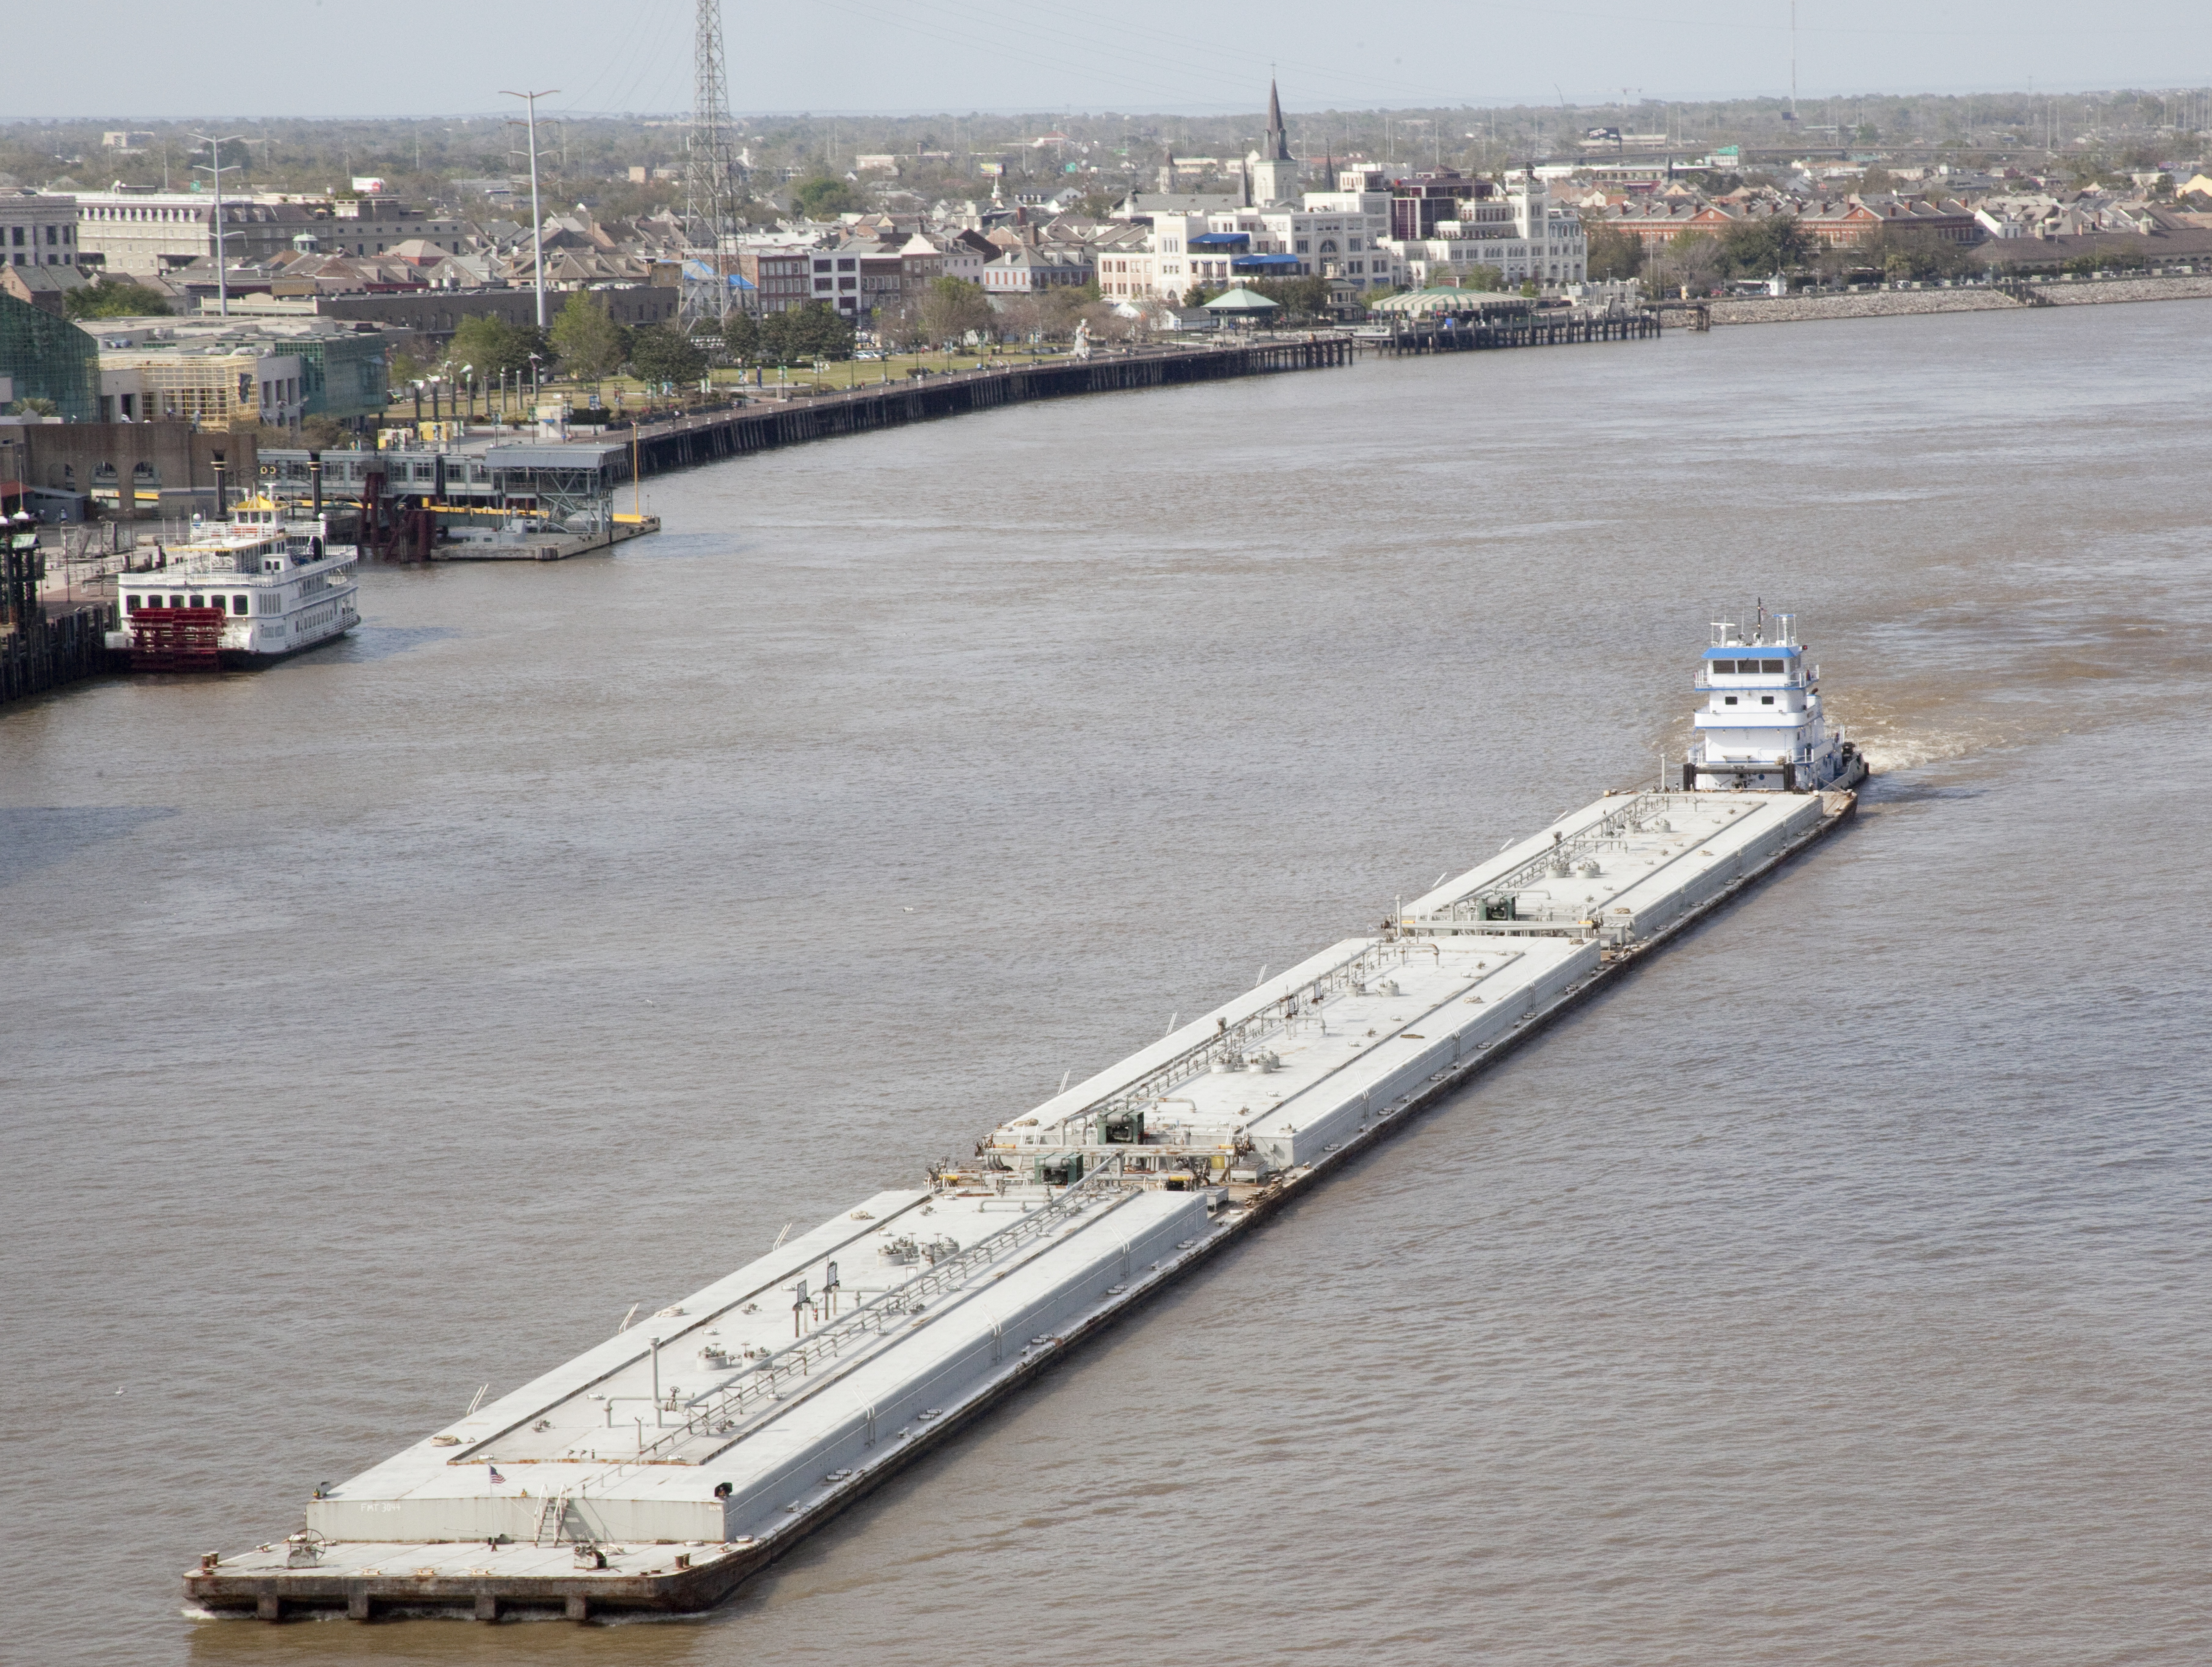 Towboat pushing barge by the French Quarter